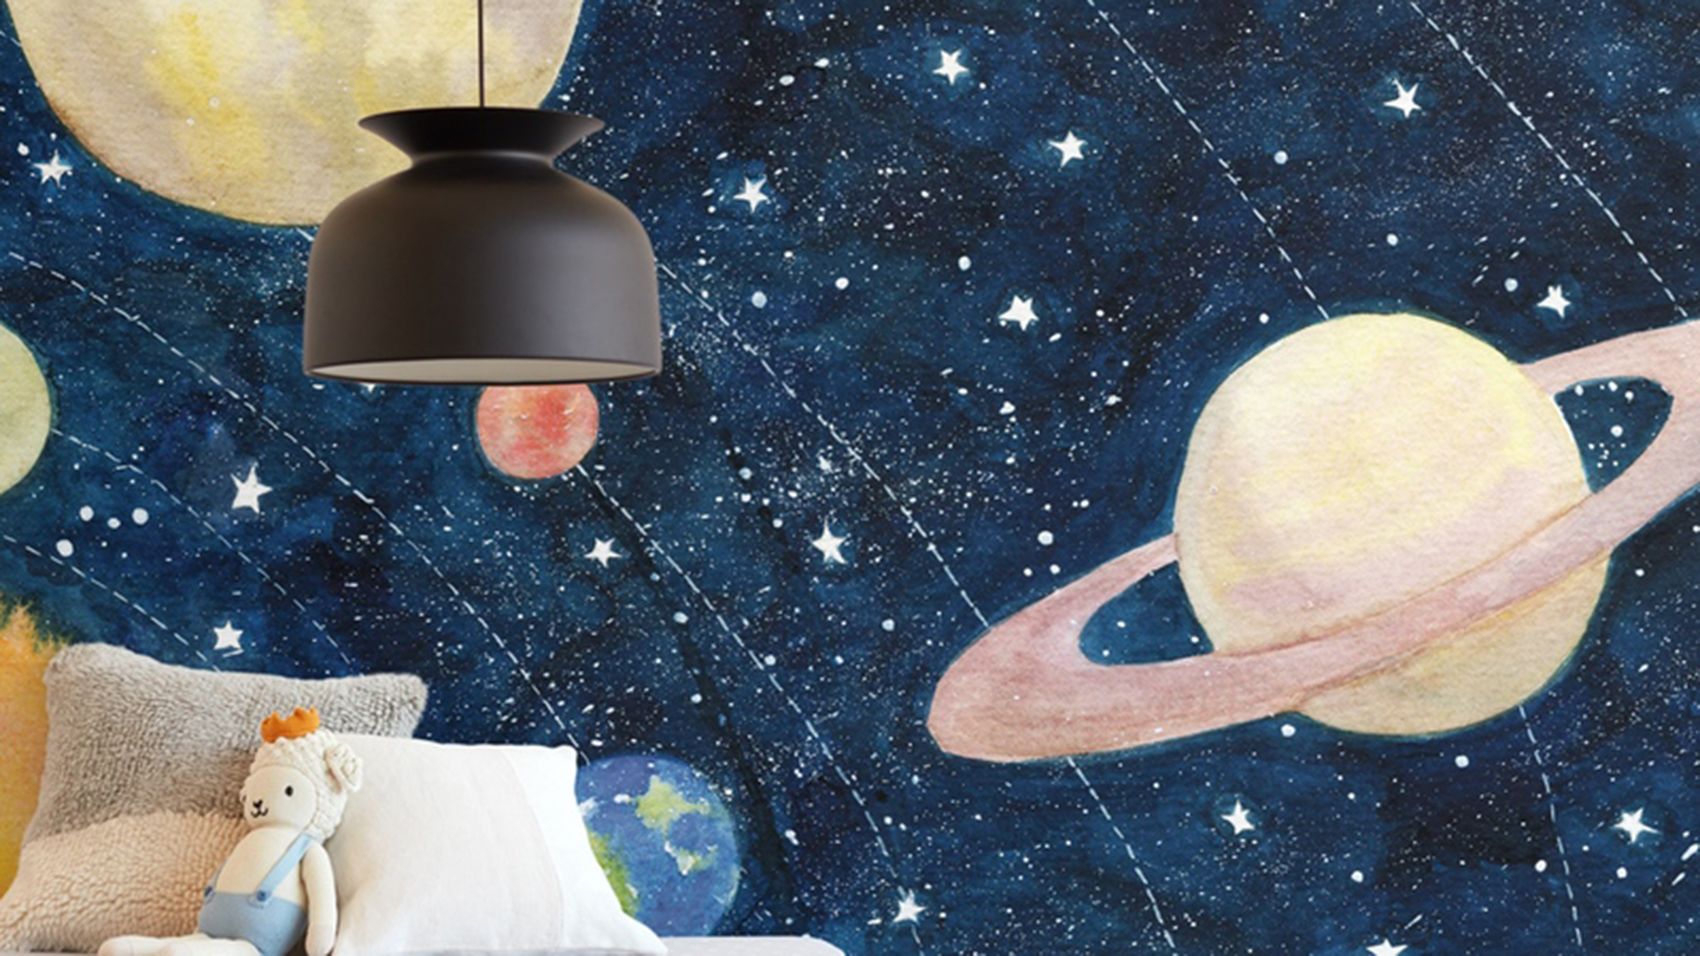 Ideal To Match Alien Outer Space UFO Cushions & Covers. Outer Space Lampshades 